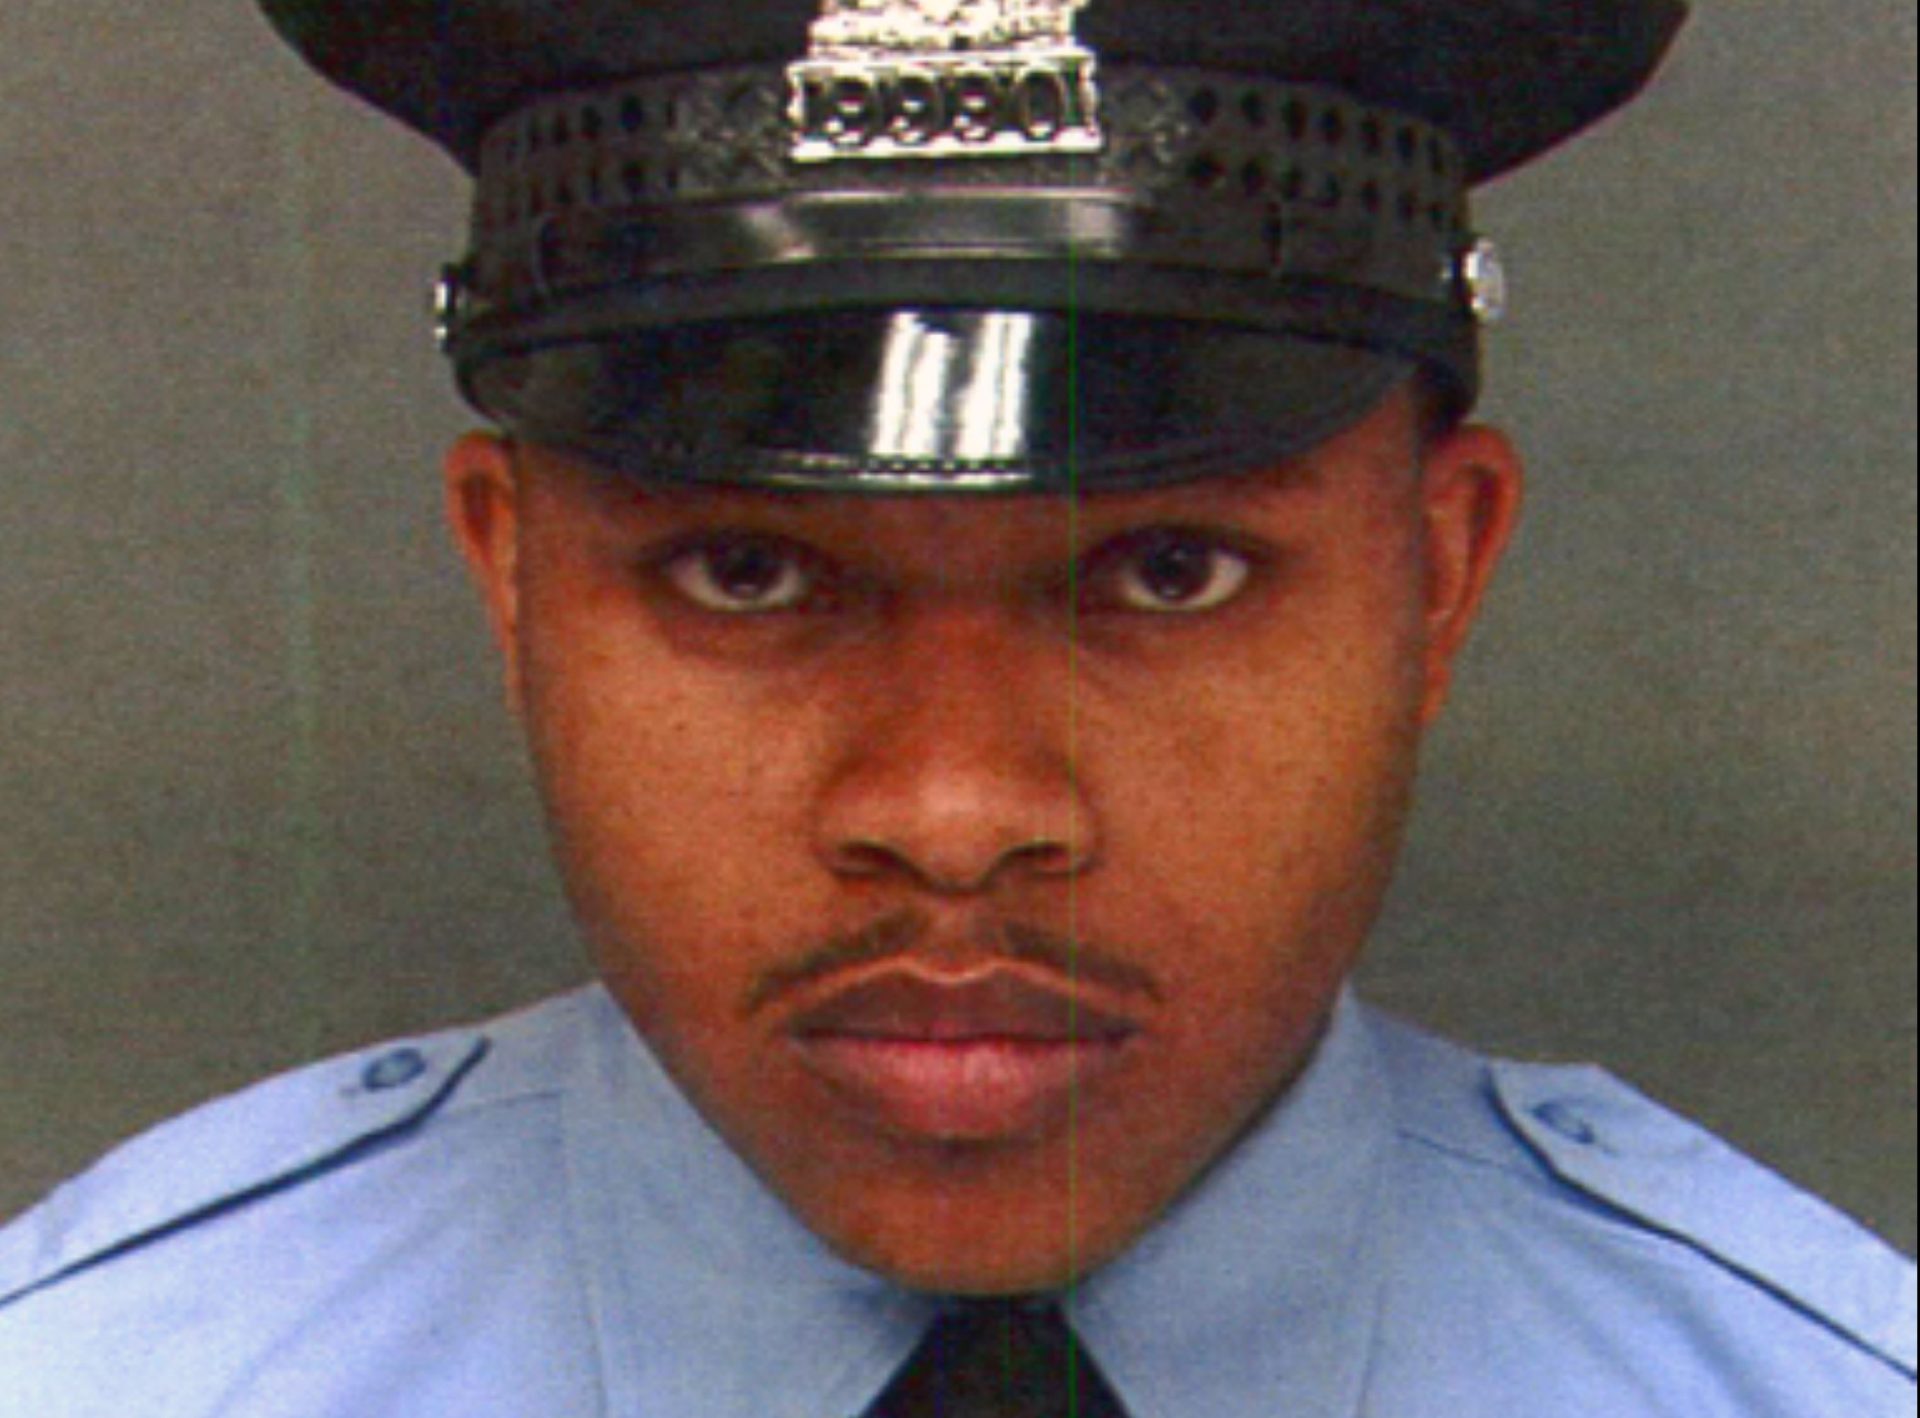 This undated photo provided by Philadelphia Police Department, shows Robert Wilson III. Wilson, a Philadelphia police officer, was shot in the head and killed after he and his partner exchanged gunfire with two suspects trying to rob a video game store, city officials said Thursday, March 5, 2015.